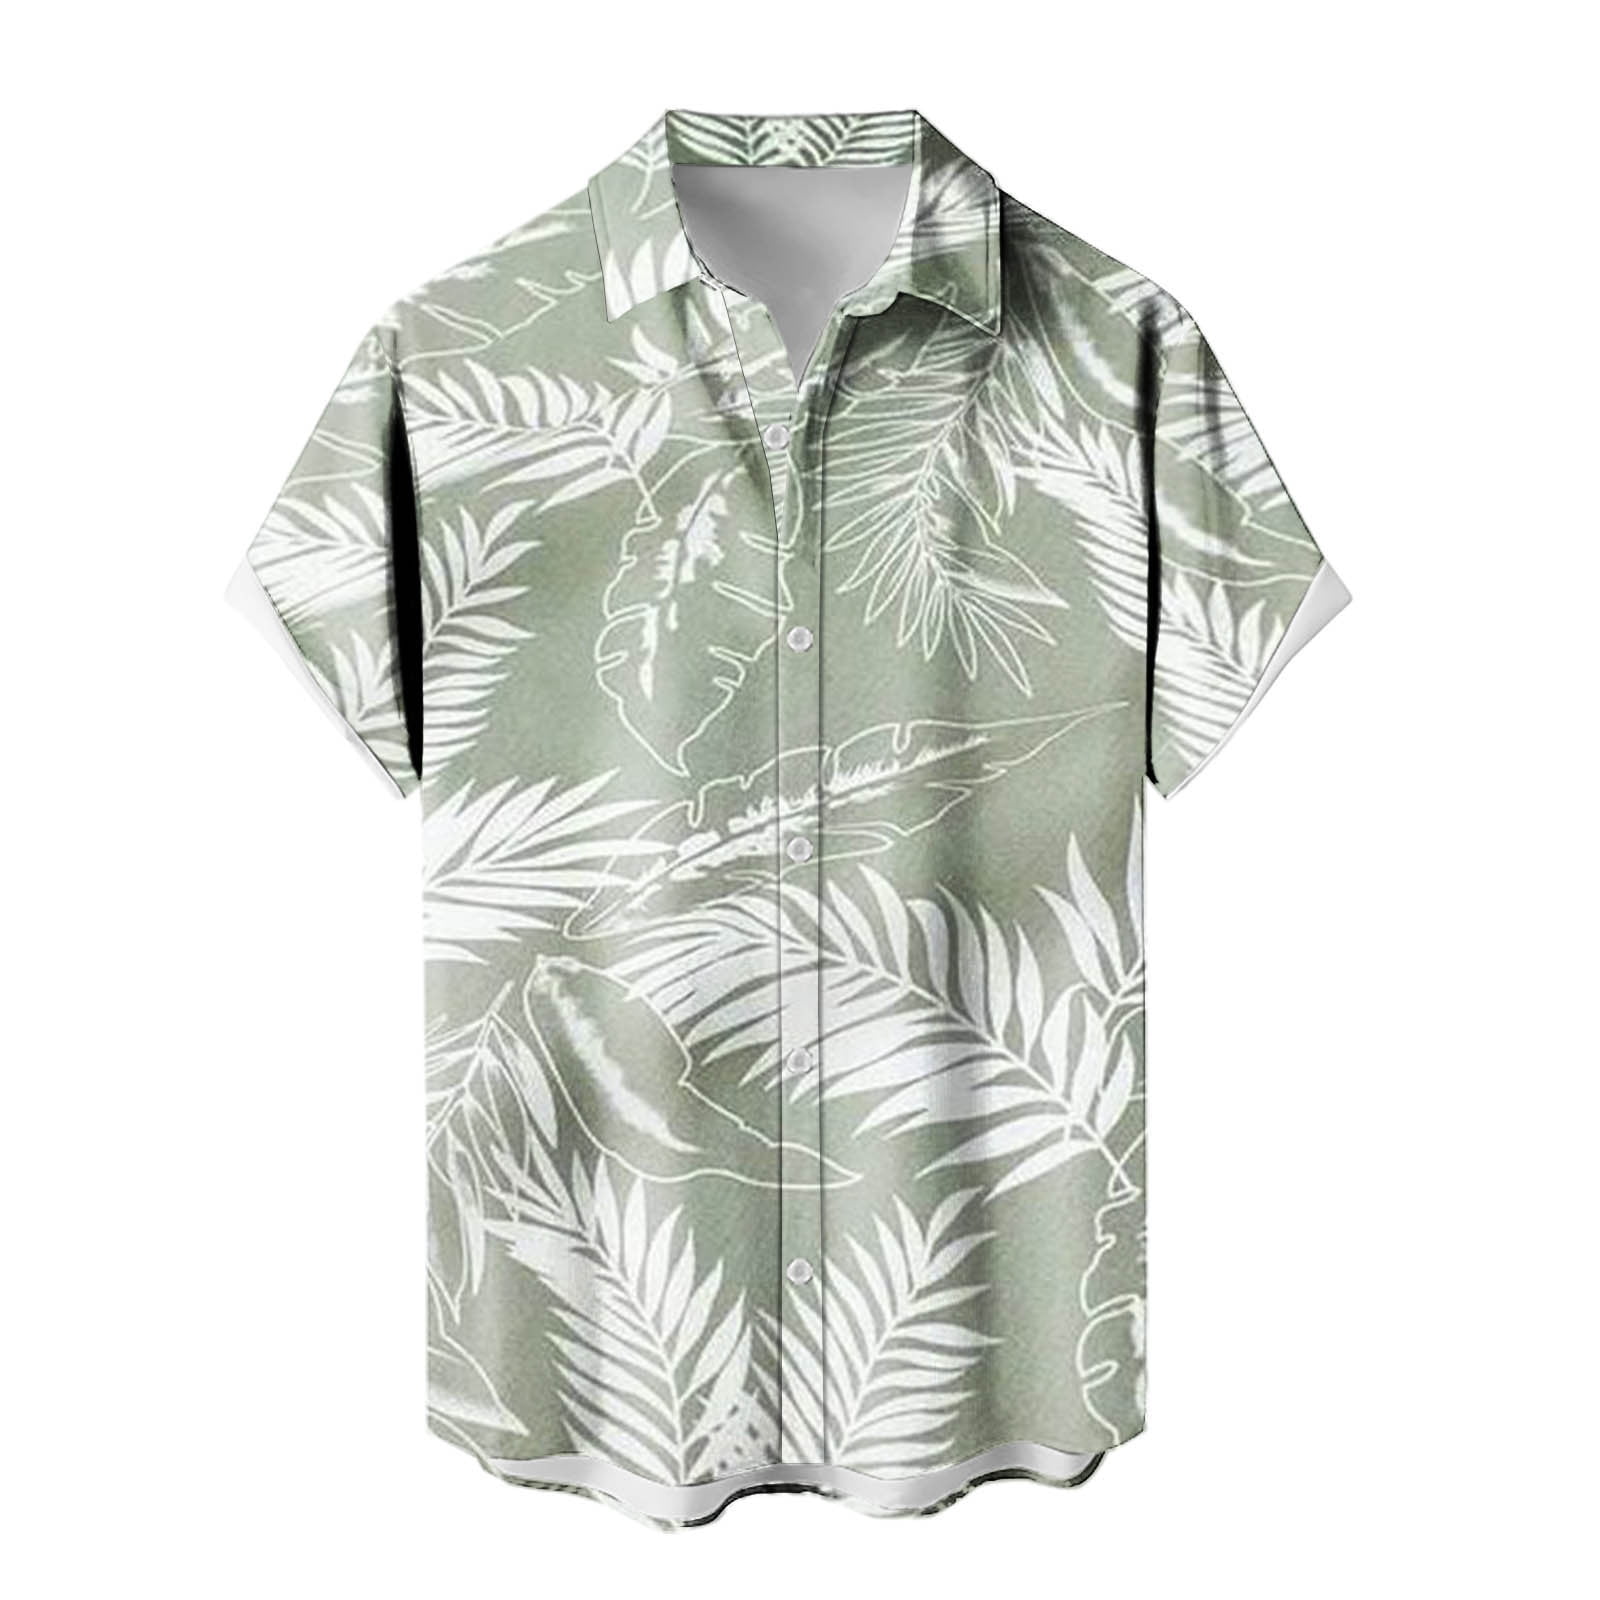 Men's Hawaiian Graphic Shirts Lightweight Soft Comfy Hawaii Shirts Outfits  Gym Workout Tropical Leaves Print Basic Tees Classic Short Sleeve Blouse